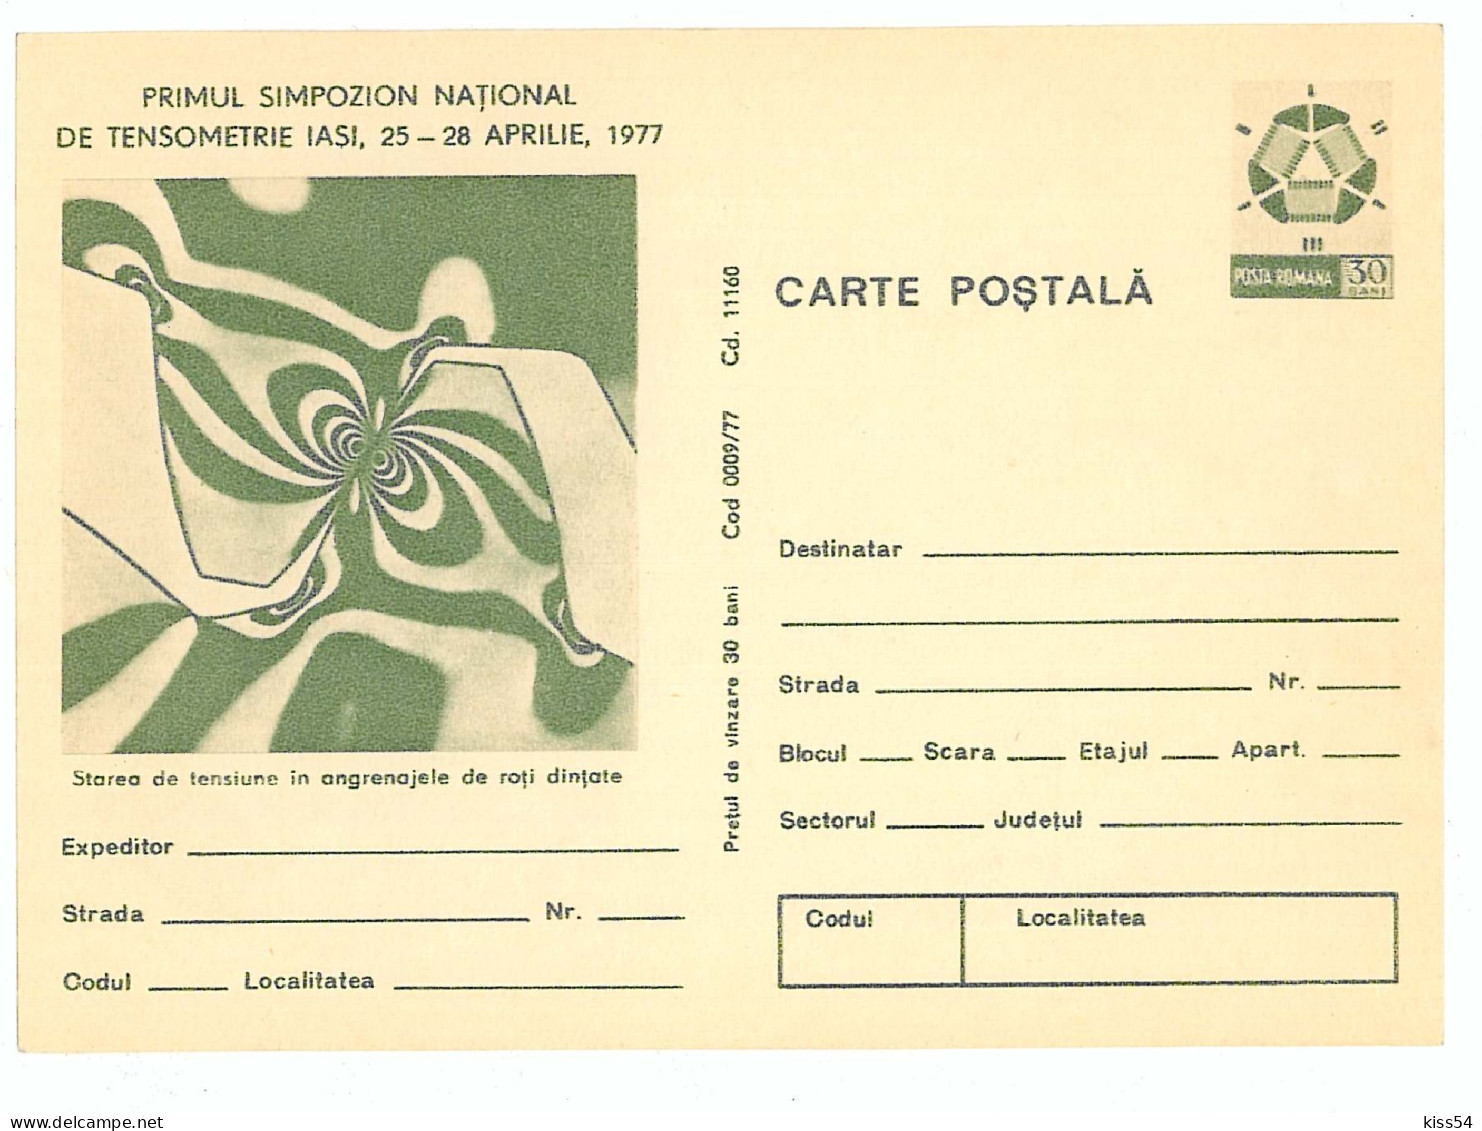 IP 77 A - 9a National Symposium On Tensometry - Stationery - Unused - 1977 - Ganzsachen